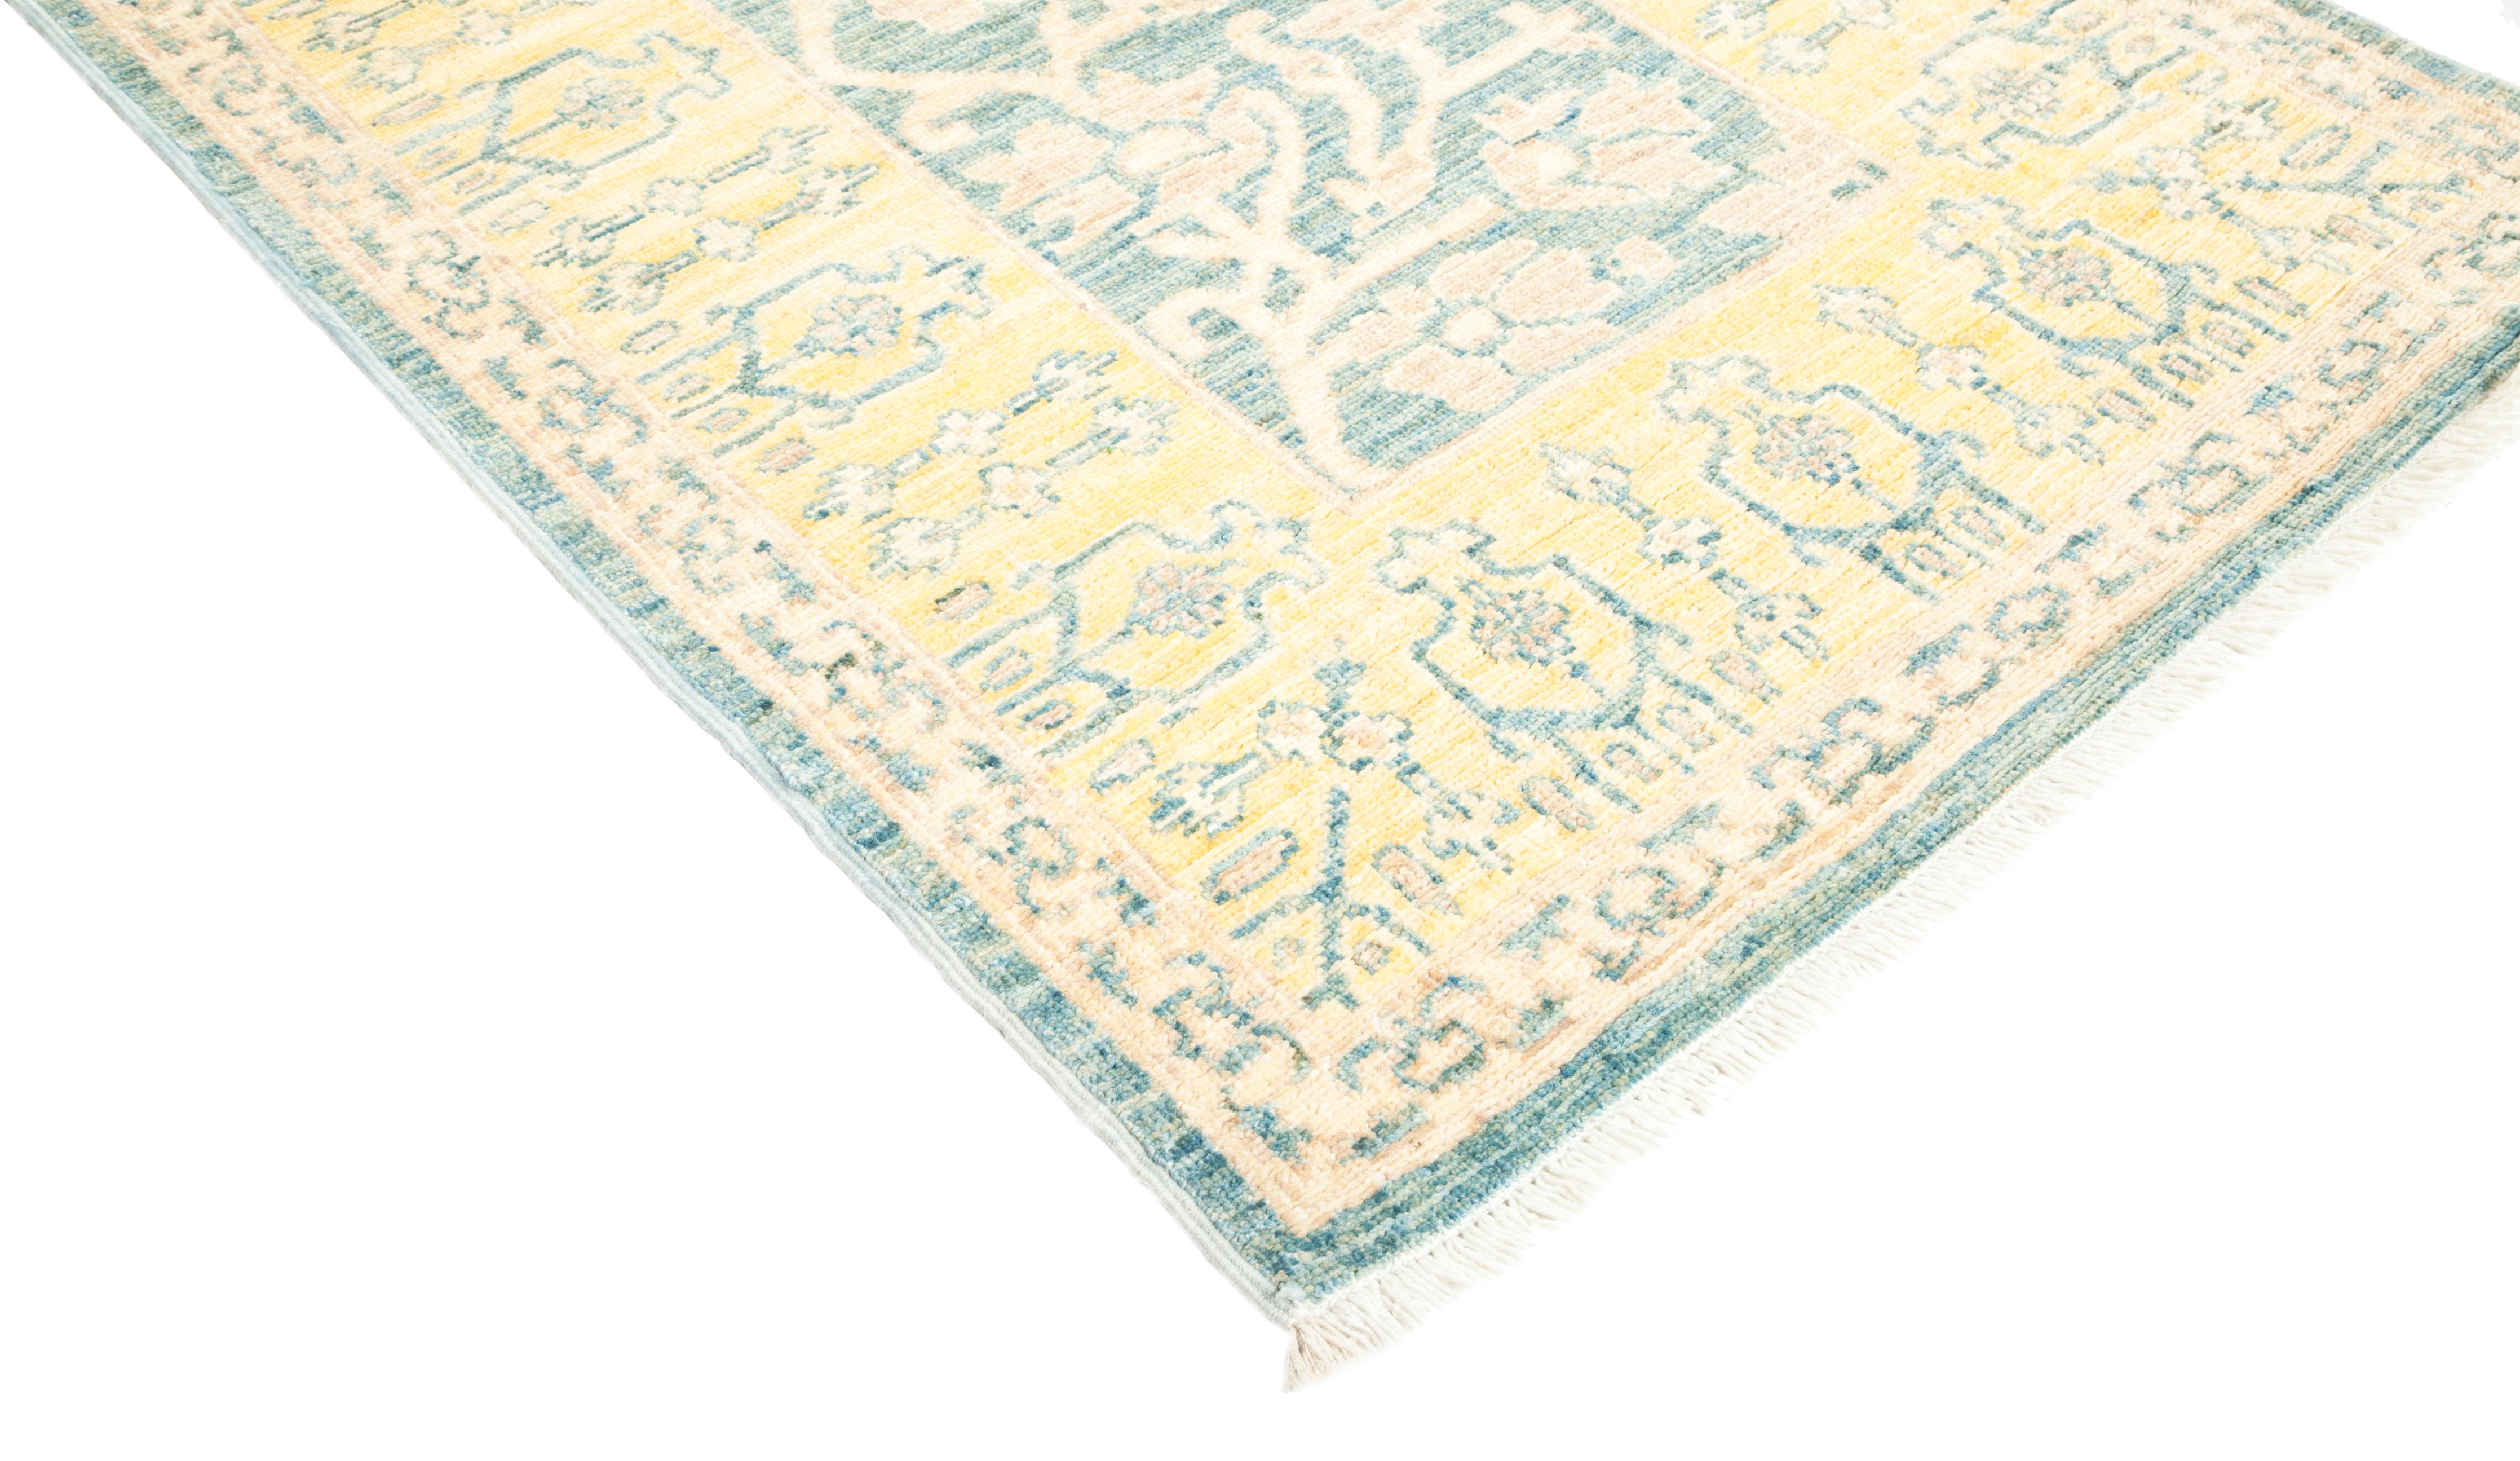 Color: Green, made in Pakistan. 100% wool. Whether boasting a field of flowers or ancient tribal symbols, patterned rugs are the easiest way to enrich a space. Subtle colors and intricate motifs reinforce the quiet sophistication of a traditional